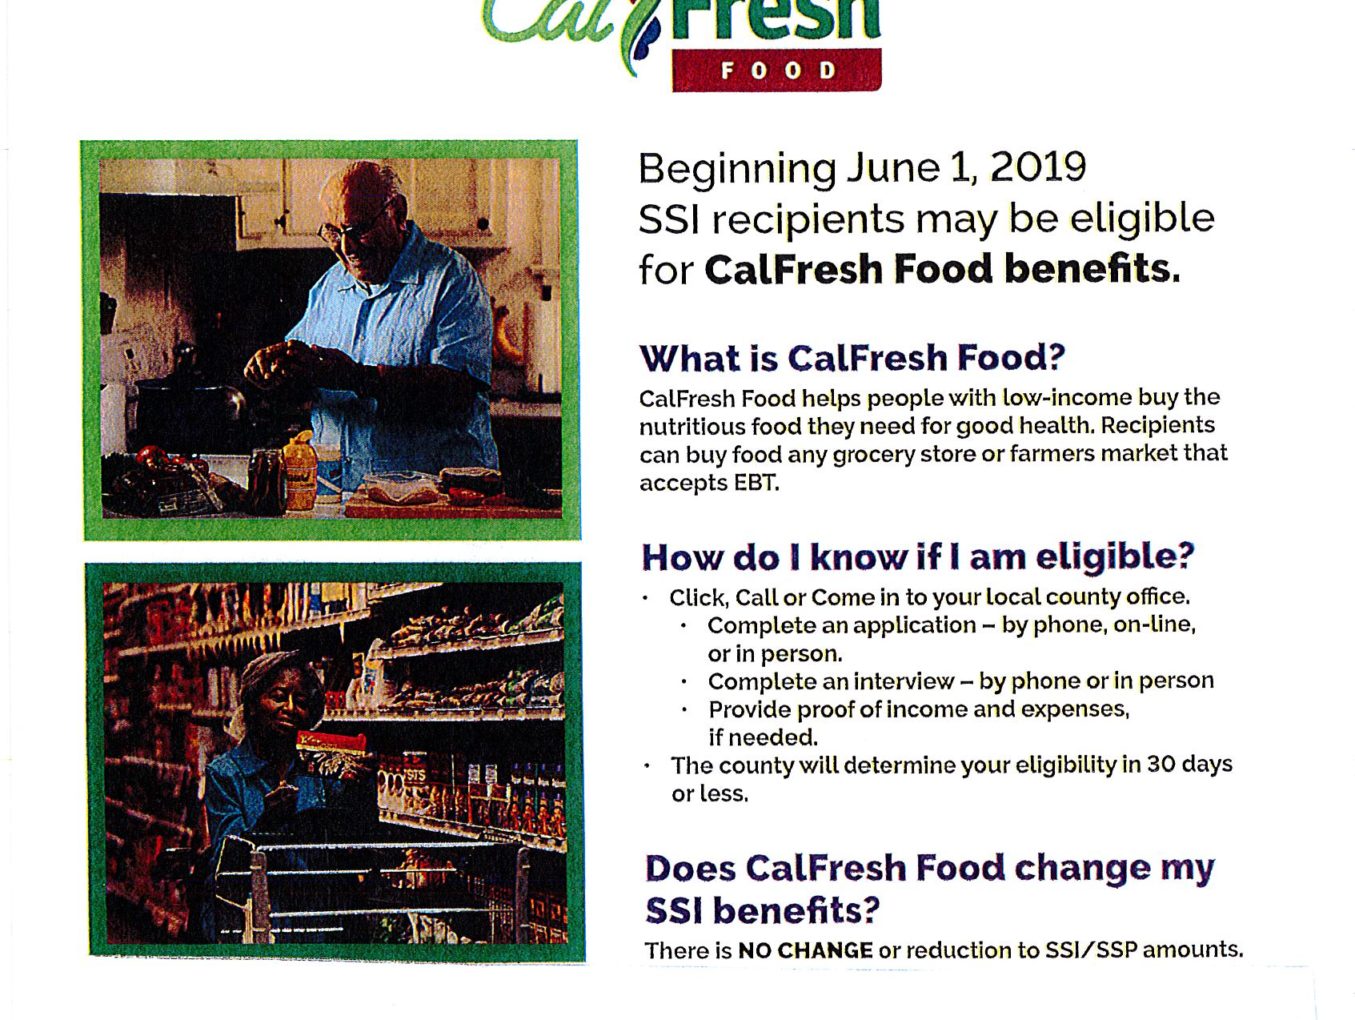 SSI recipients may be eligible for CalFresh Food benefits beginning June 1, 2019